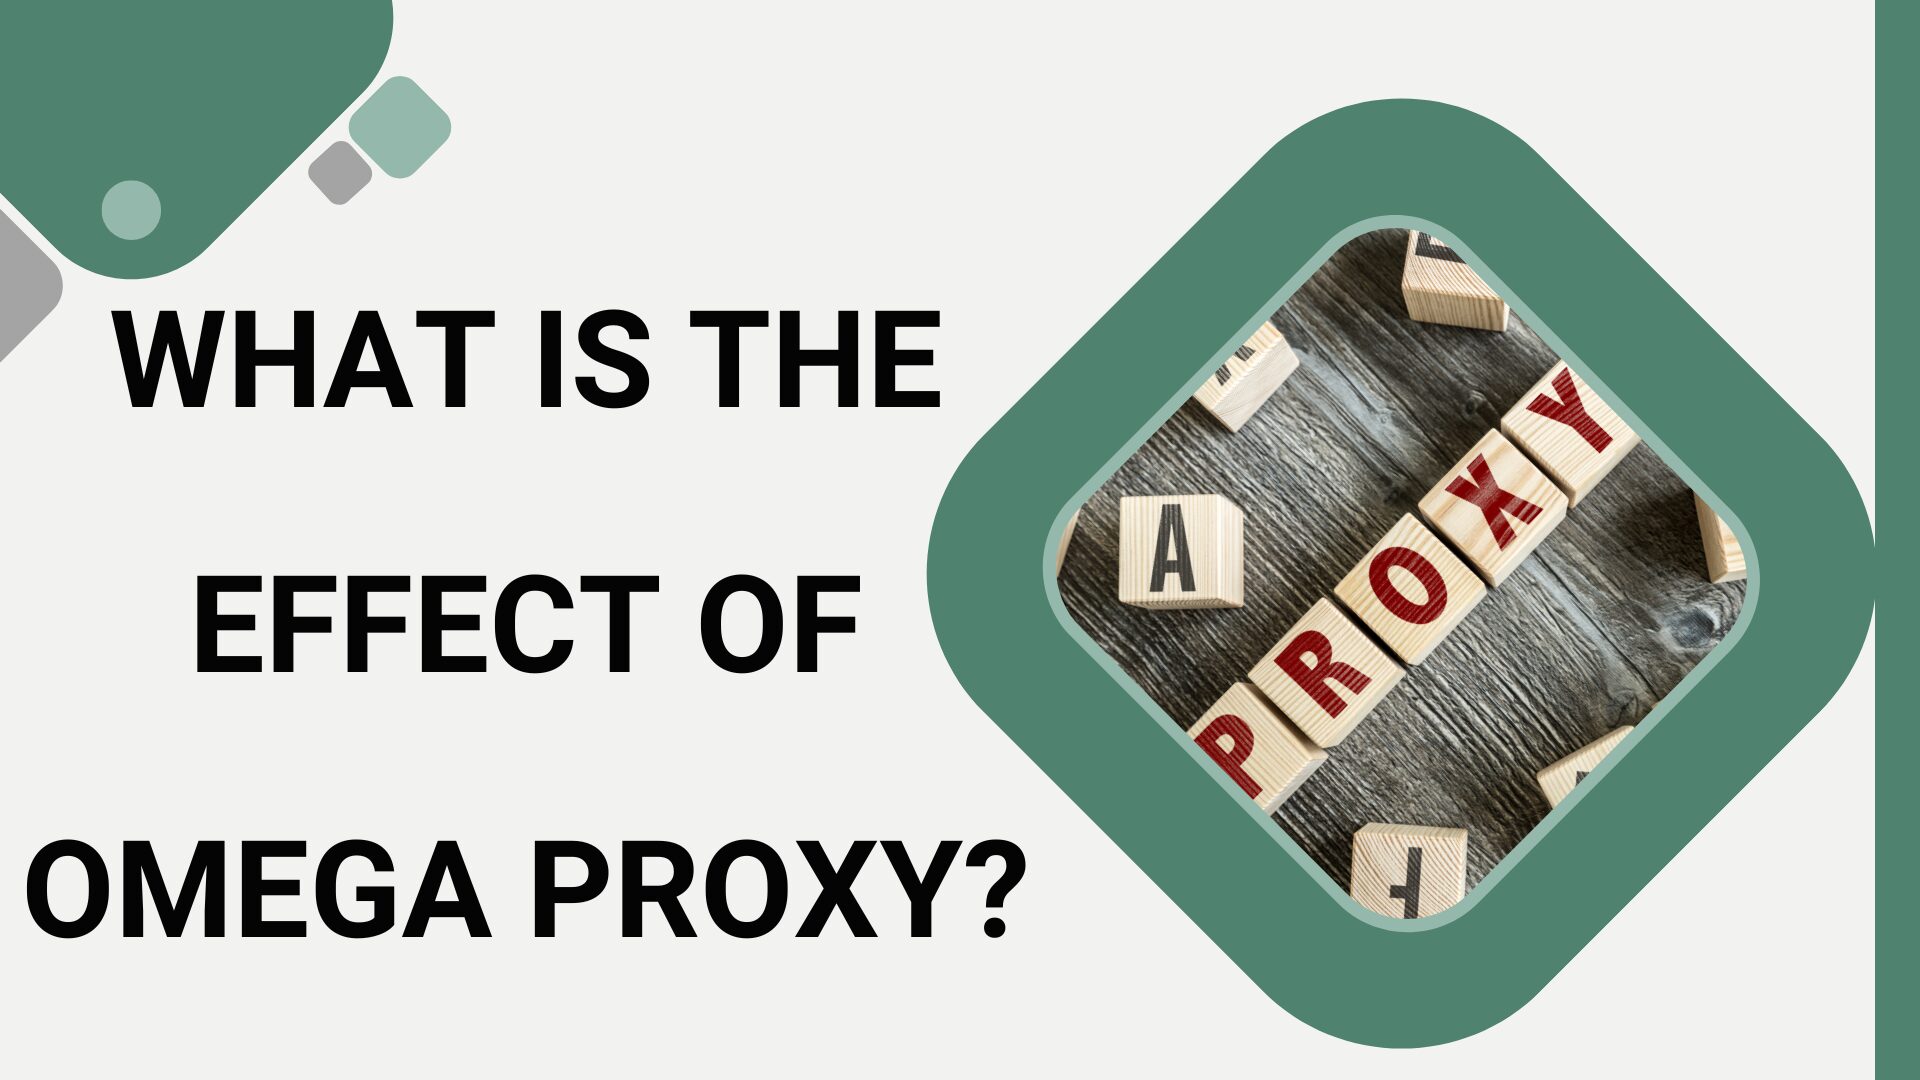 What is the effect of Omega Proxy?